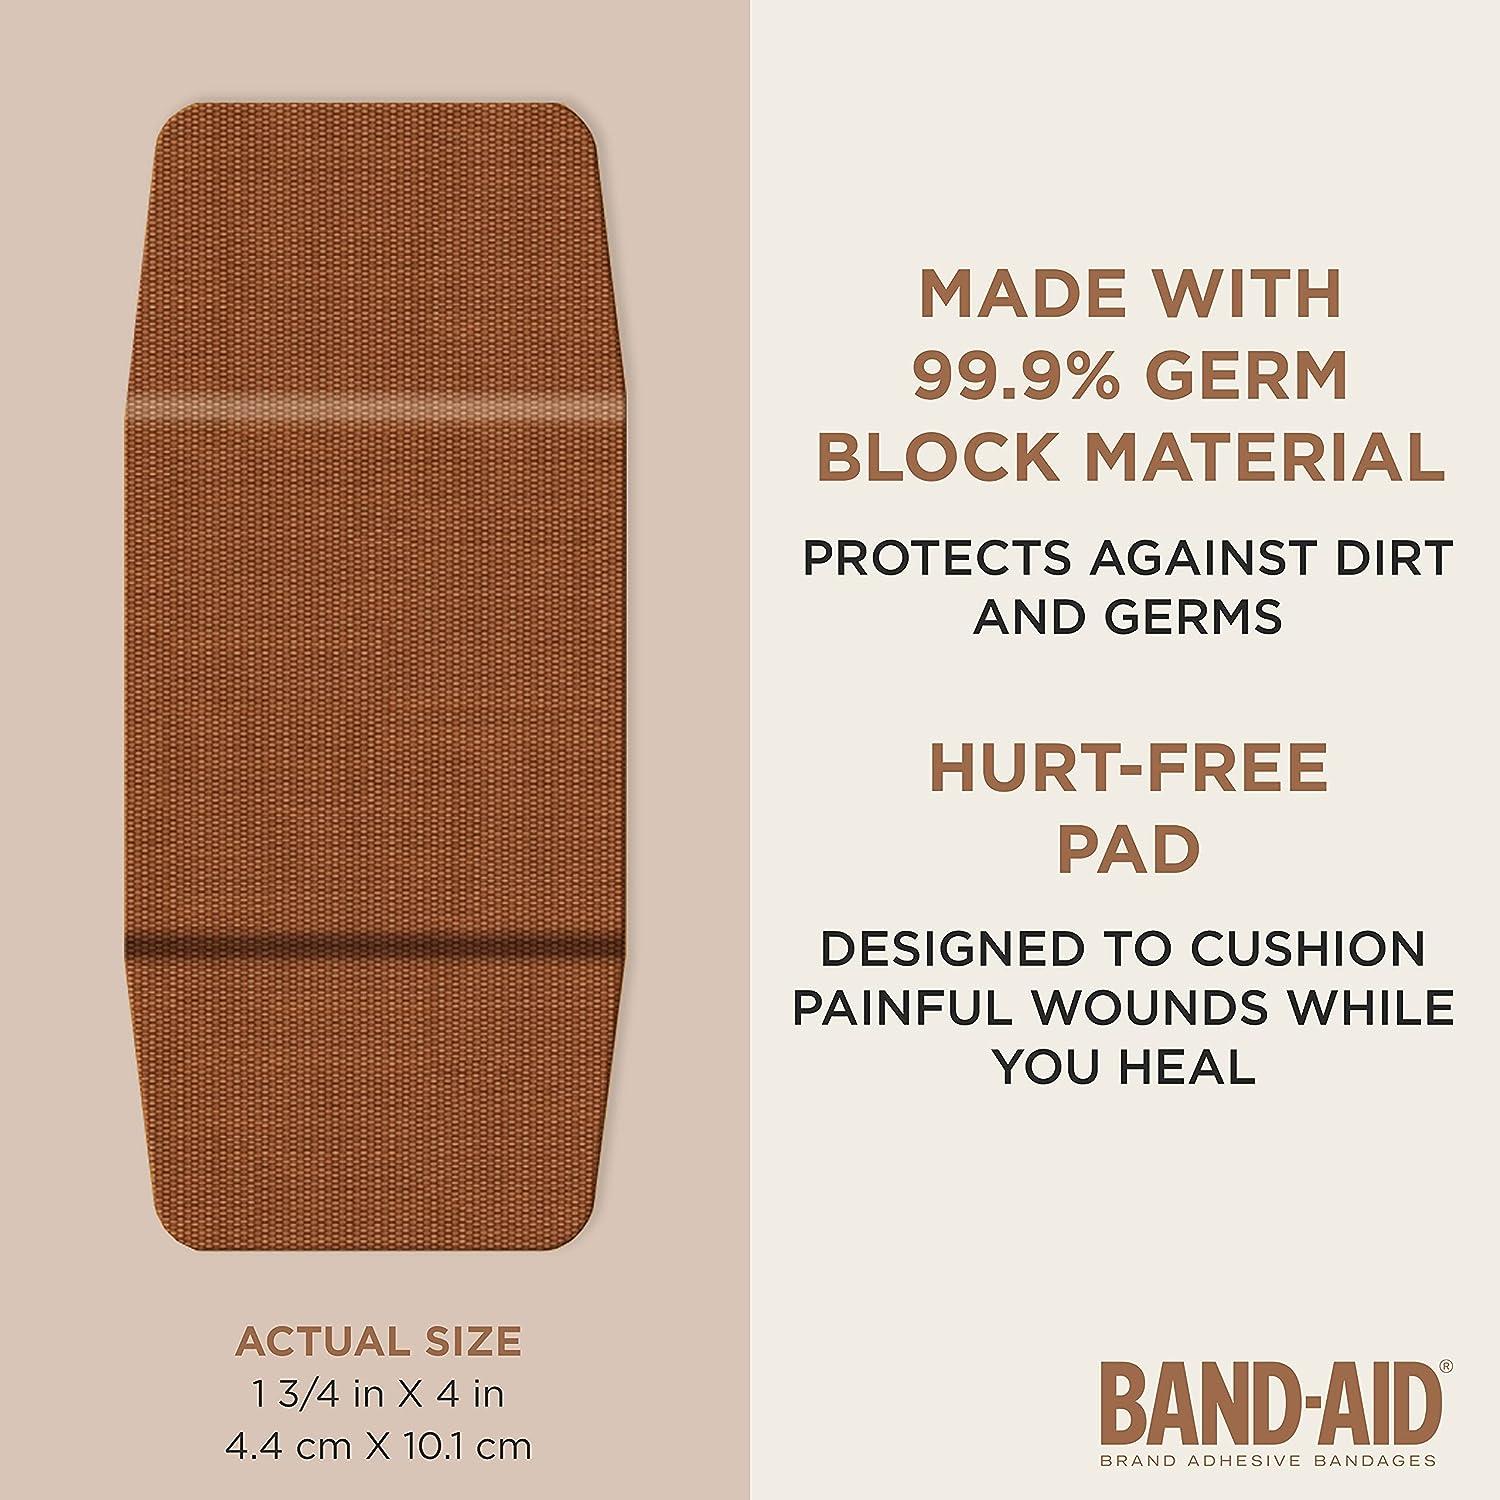  Band-Aid Brand Ourtone Adhesive Bandages, Flexible Protection &  Care of Minor Cuts & Scrapes, Quilt-Aid Pad for Painful Wounds, BR55, Extra  Large, 10 ct : Health & Household